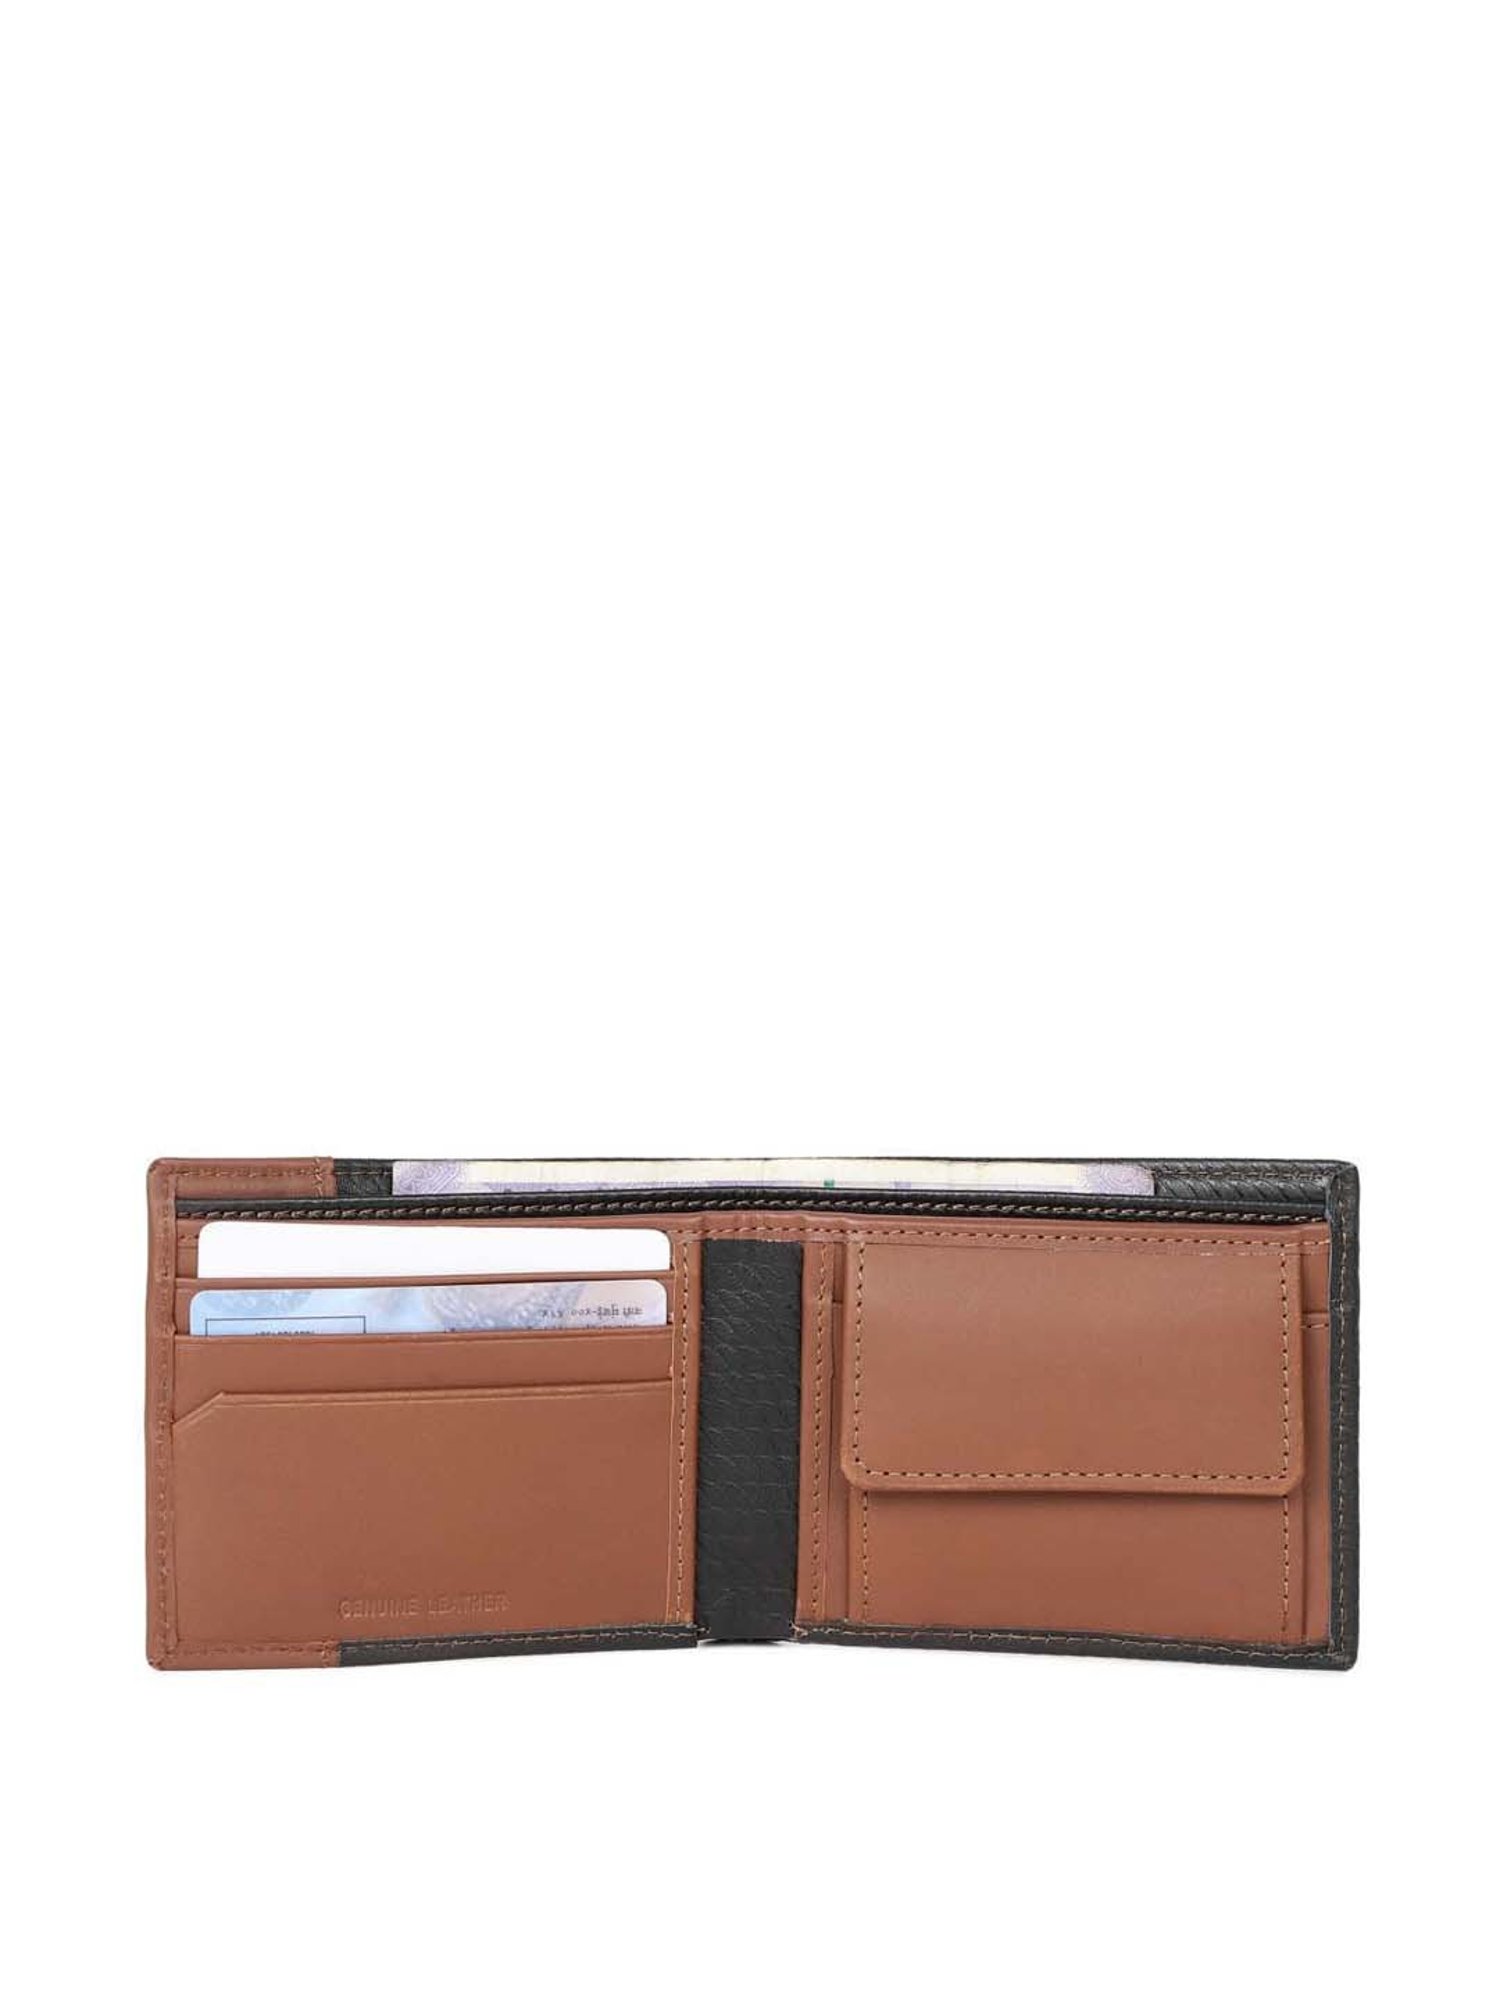 Fastrack Tan Brown Everyday Casual Wallet For Women : Amazon.in: Toys &  Games